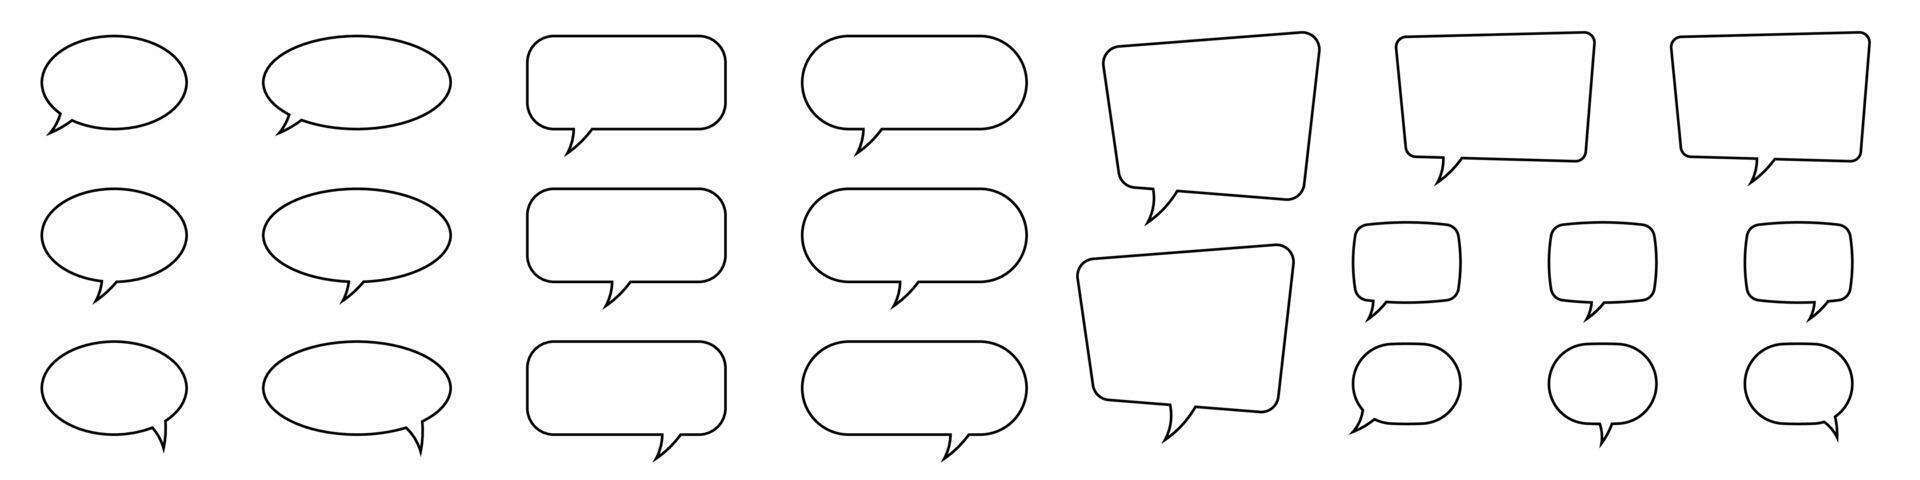 Speech bubble, speech balloon, chat bubble line art icon for apps and websites. vector